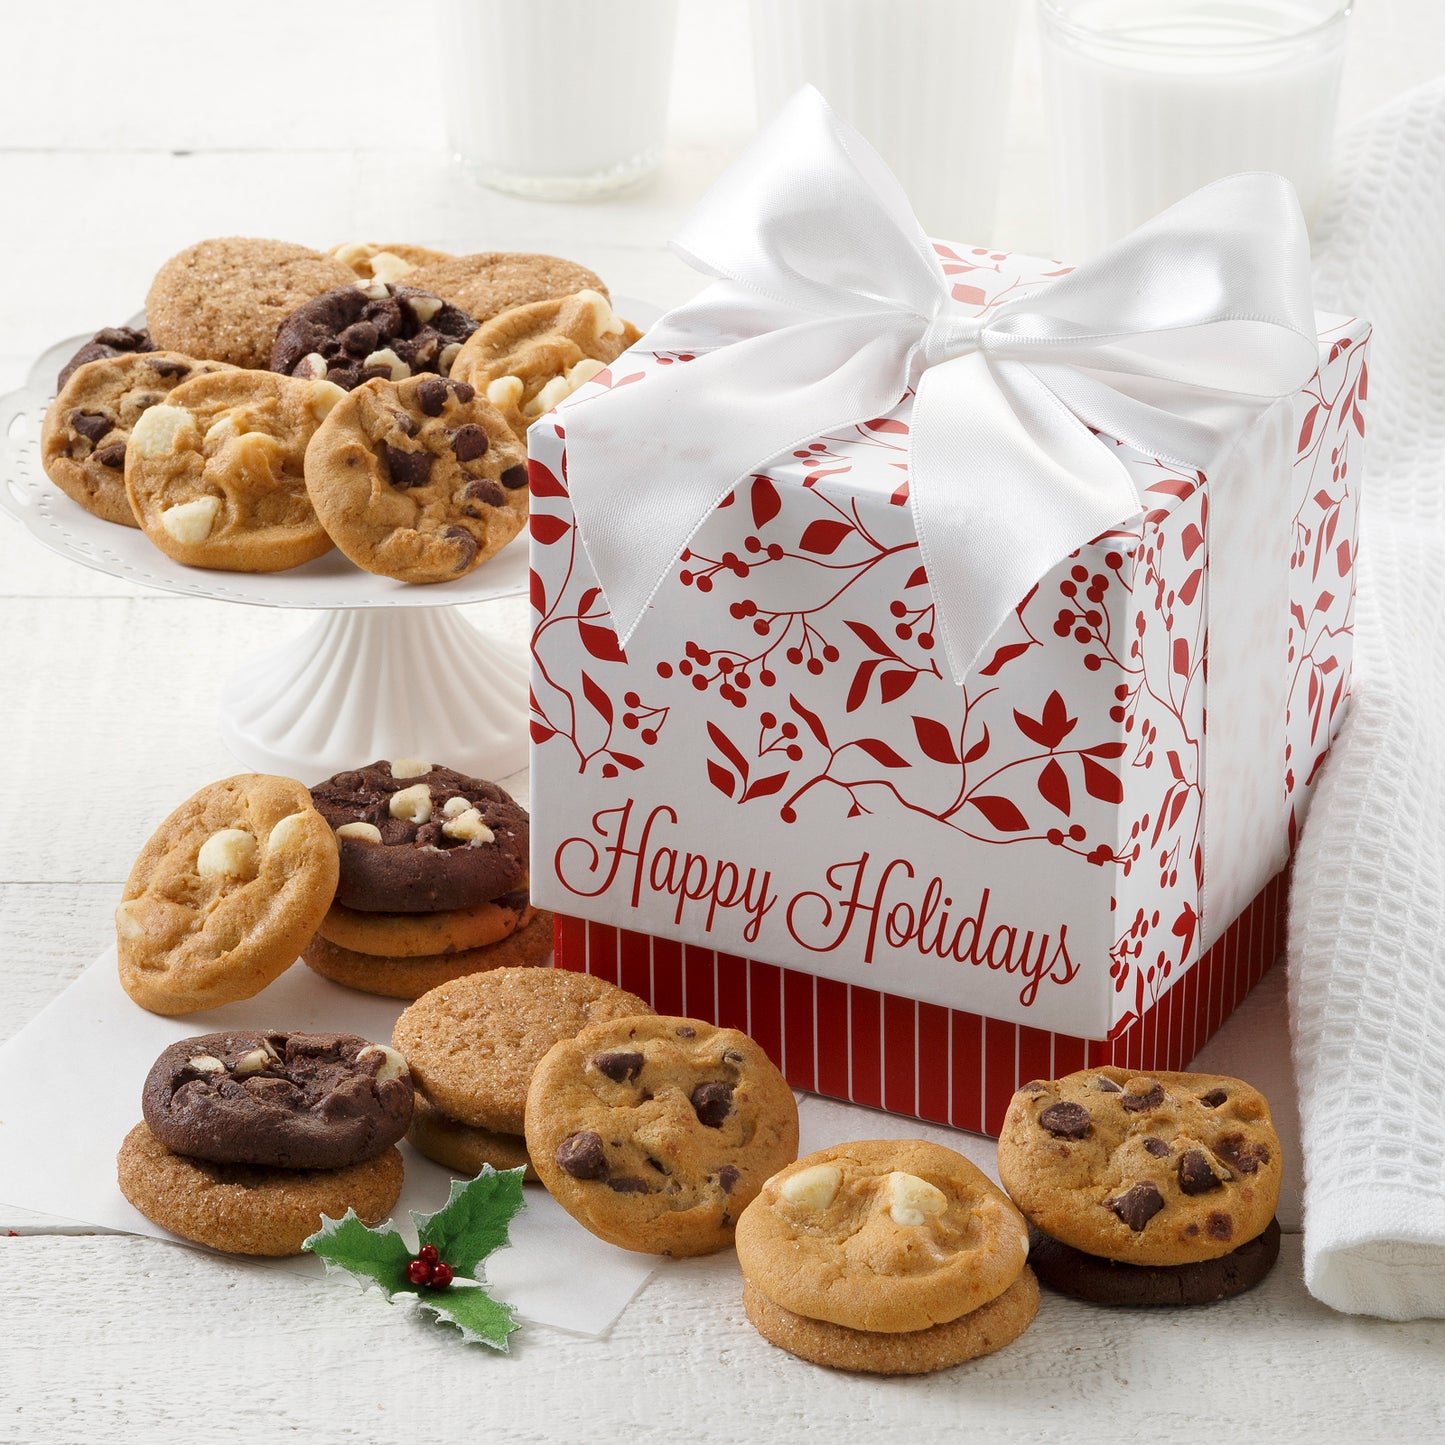 A Happy Holidays mini gift box decorated with holly and surrounded by an assortment of Nibblers®